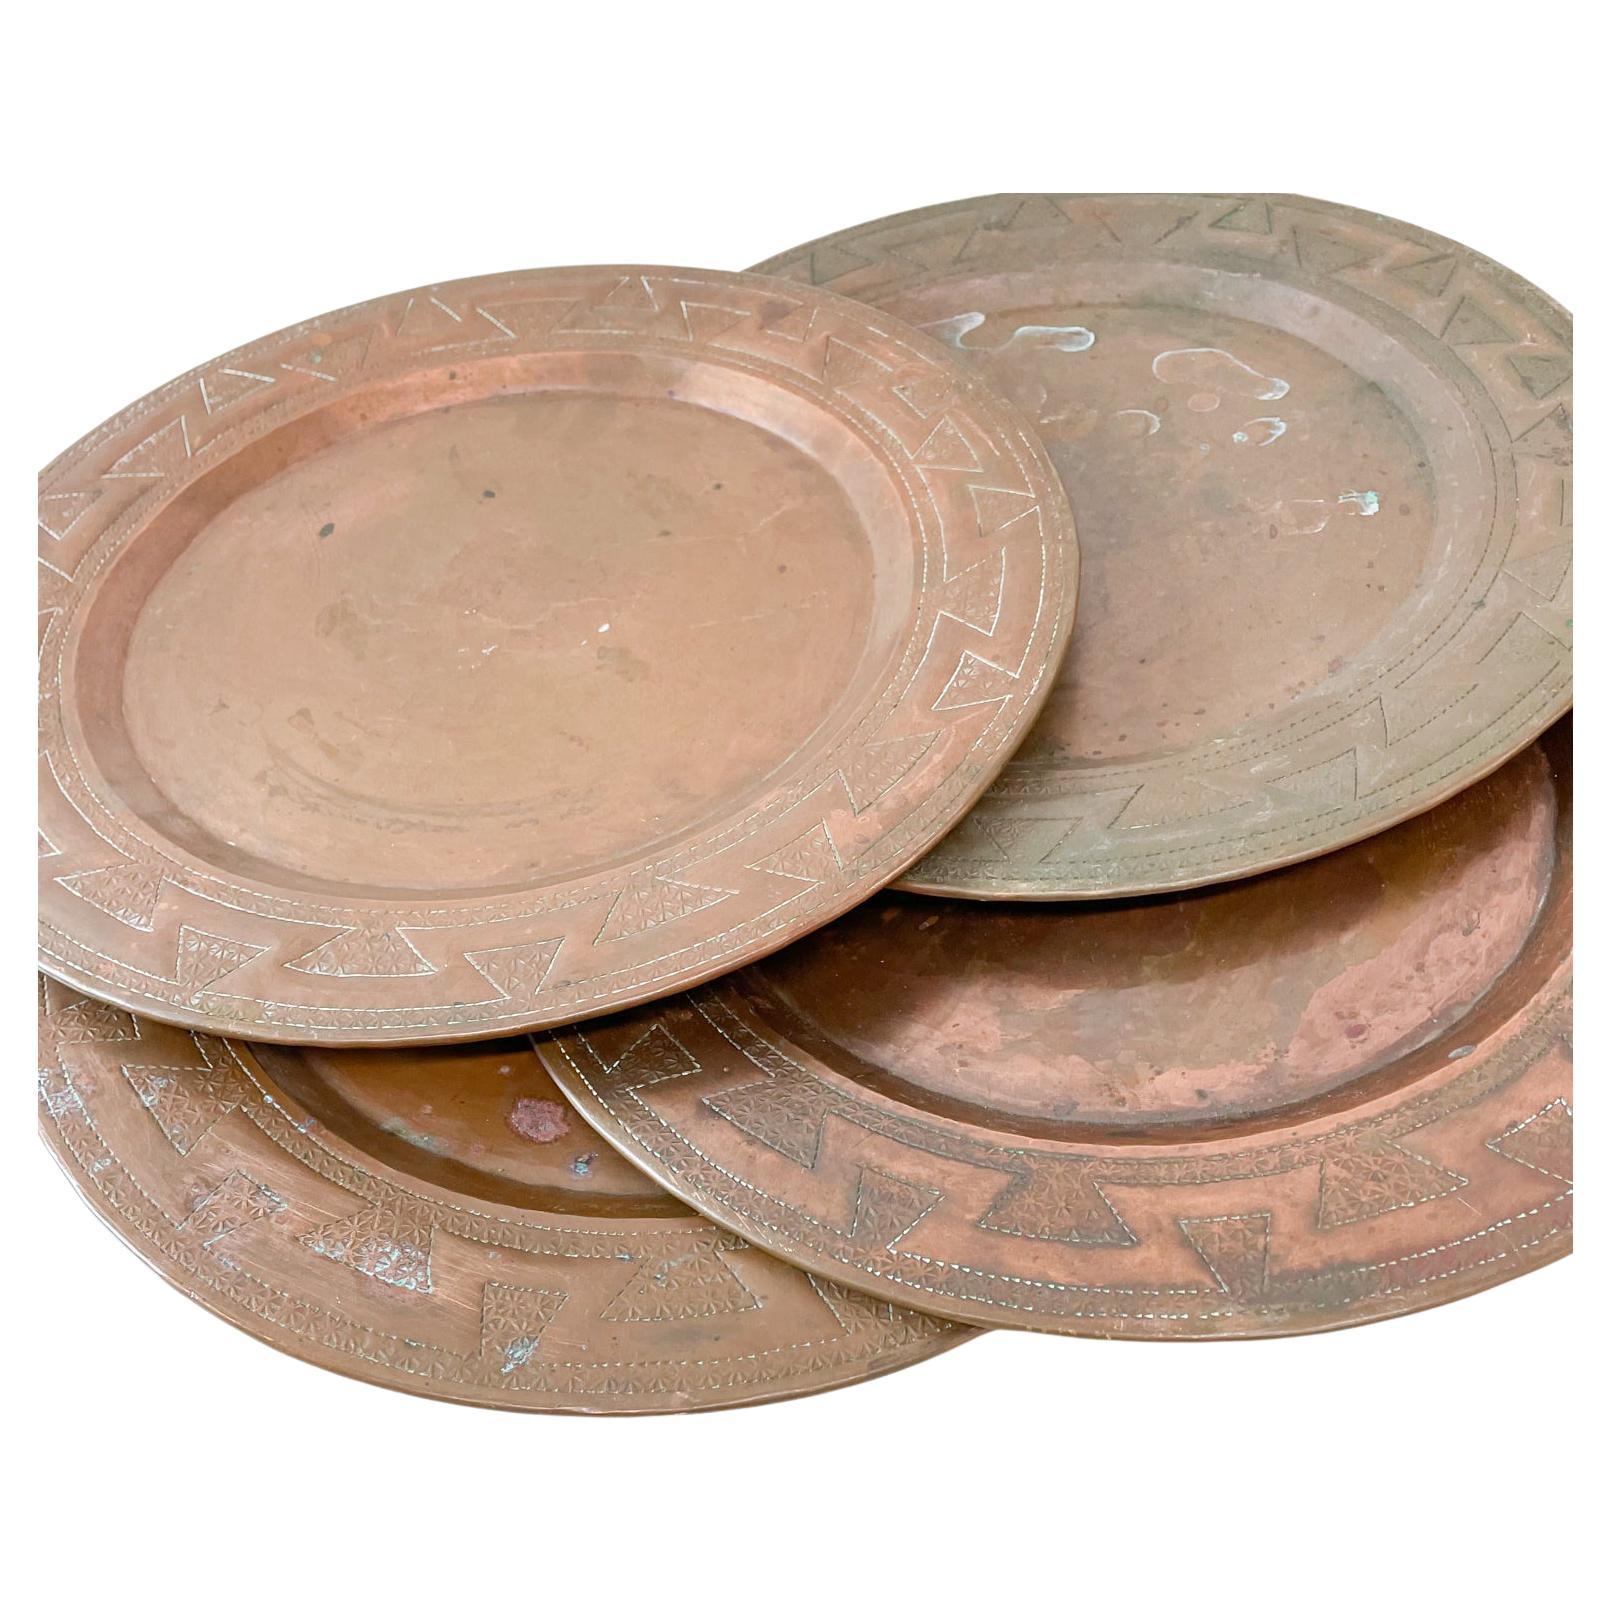 Copper plates
Aztec design engraved vintage copper plates set of four
Measures: 11.75 in diameter x .5 height per plate
Preowned unrestored vintage condition. Patinated.
No label or stamp.
Refer to images.

   